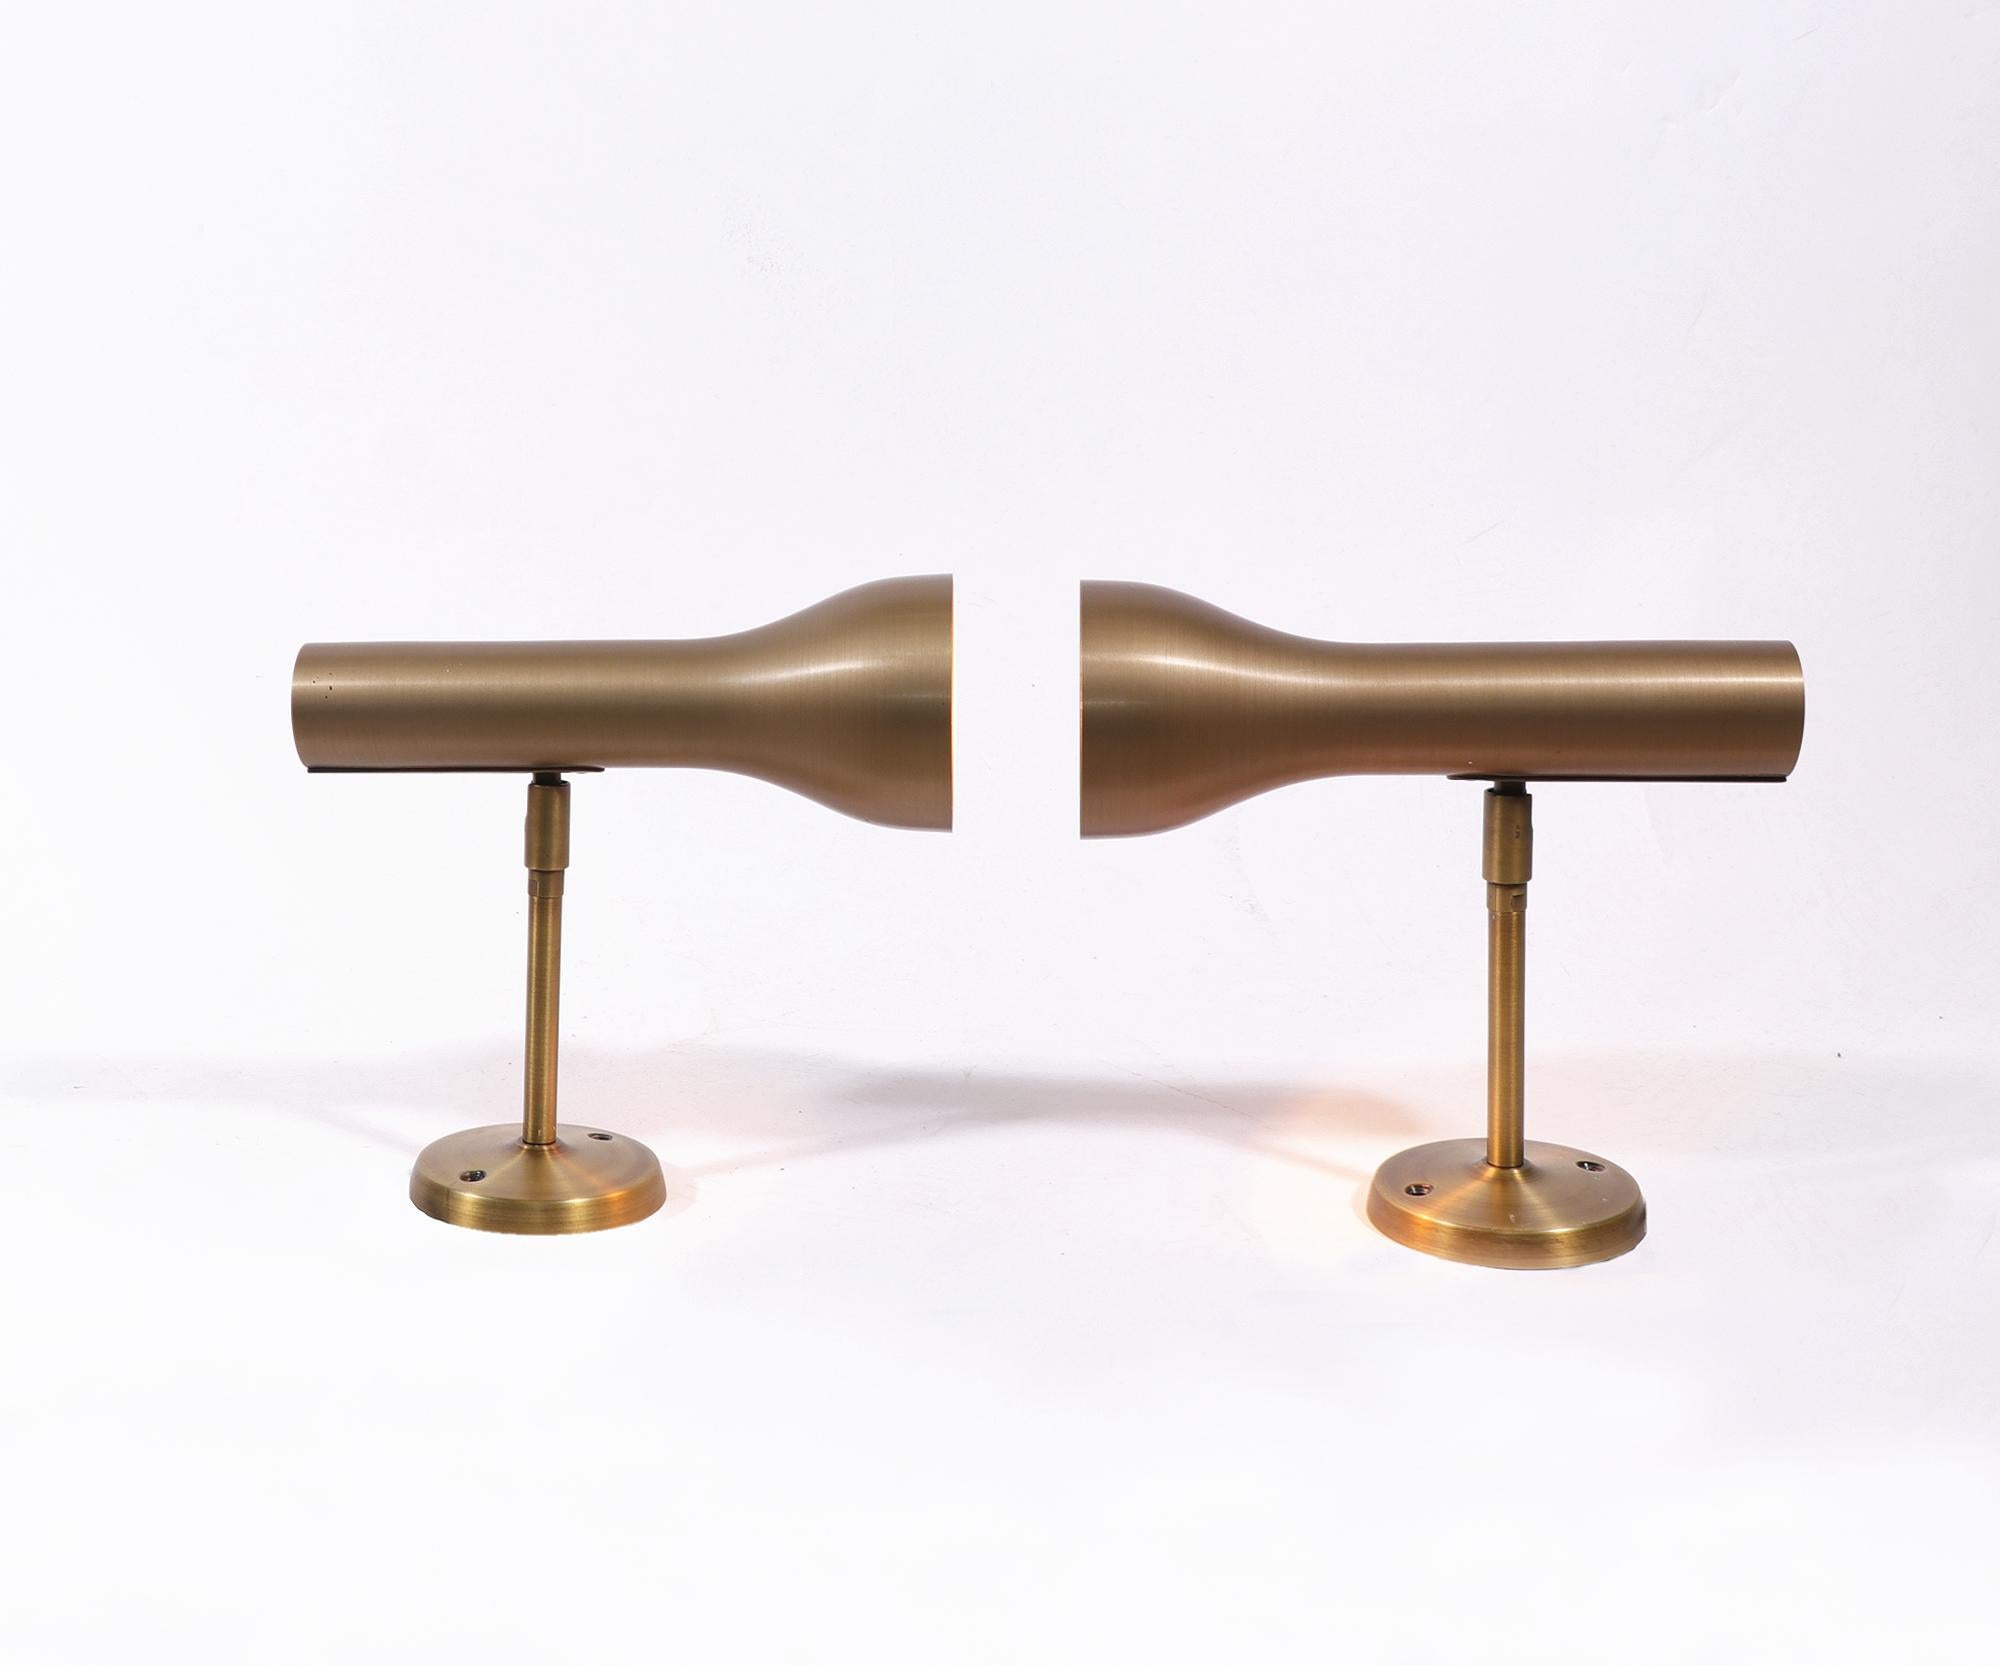 Elegant pair of brass wall spots designed by Lad Team for Swiss Lamps International, Zürich in the 1960s.

Lighting: each lamp takes one large Edison bulb. 
Measures: 9